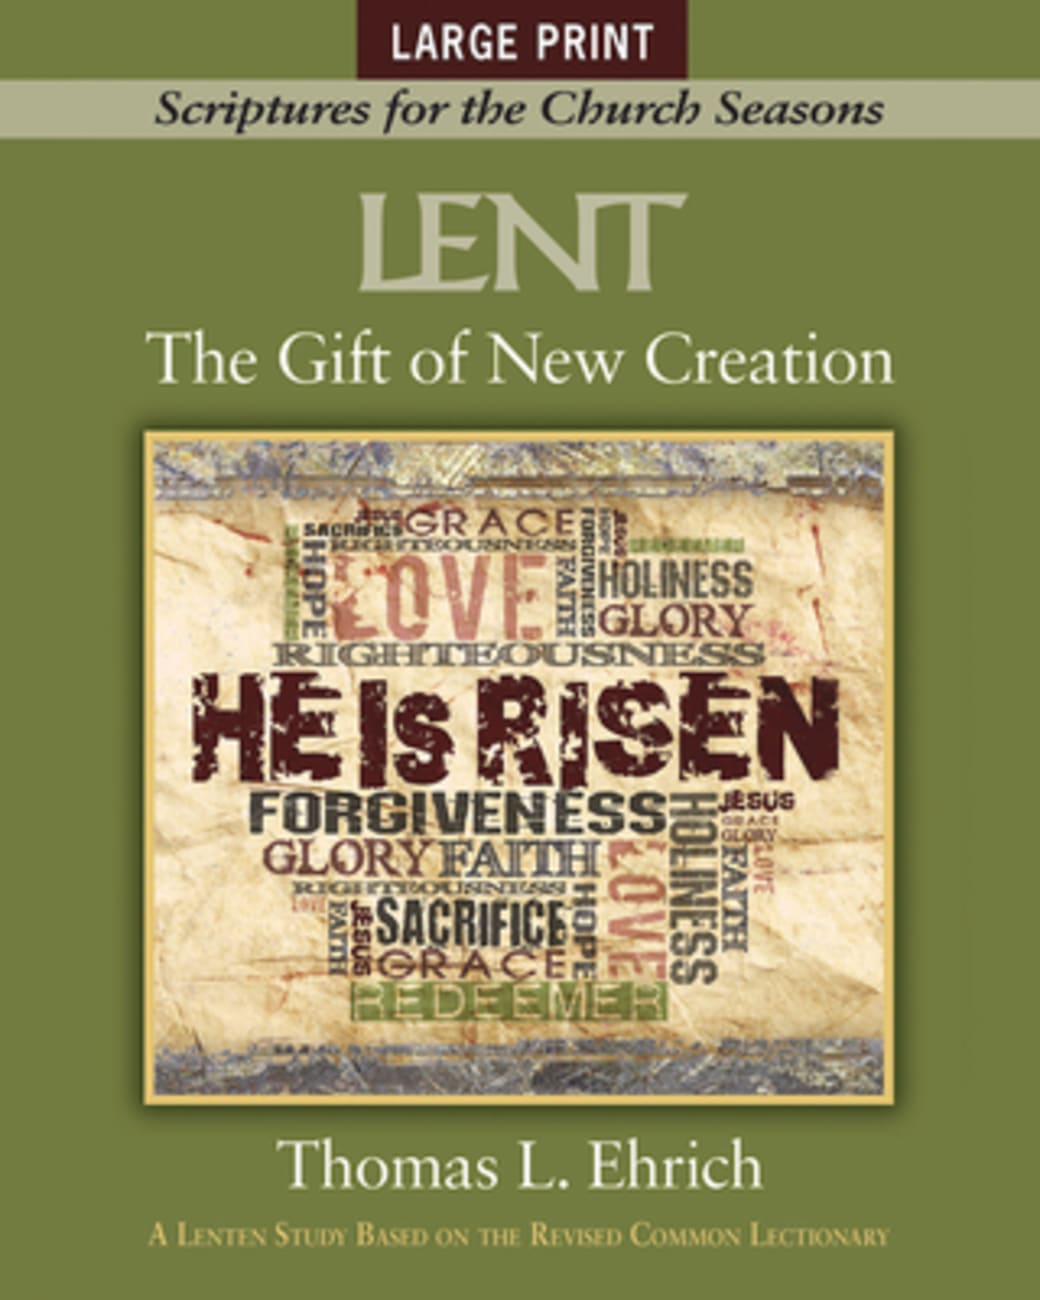 The Lent: Gift of New Creation (Large Print) (Scriptures For The Church Seasons Series) Paperback